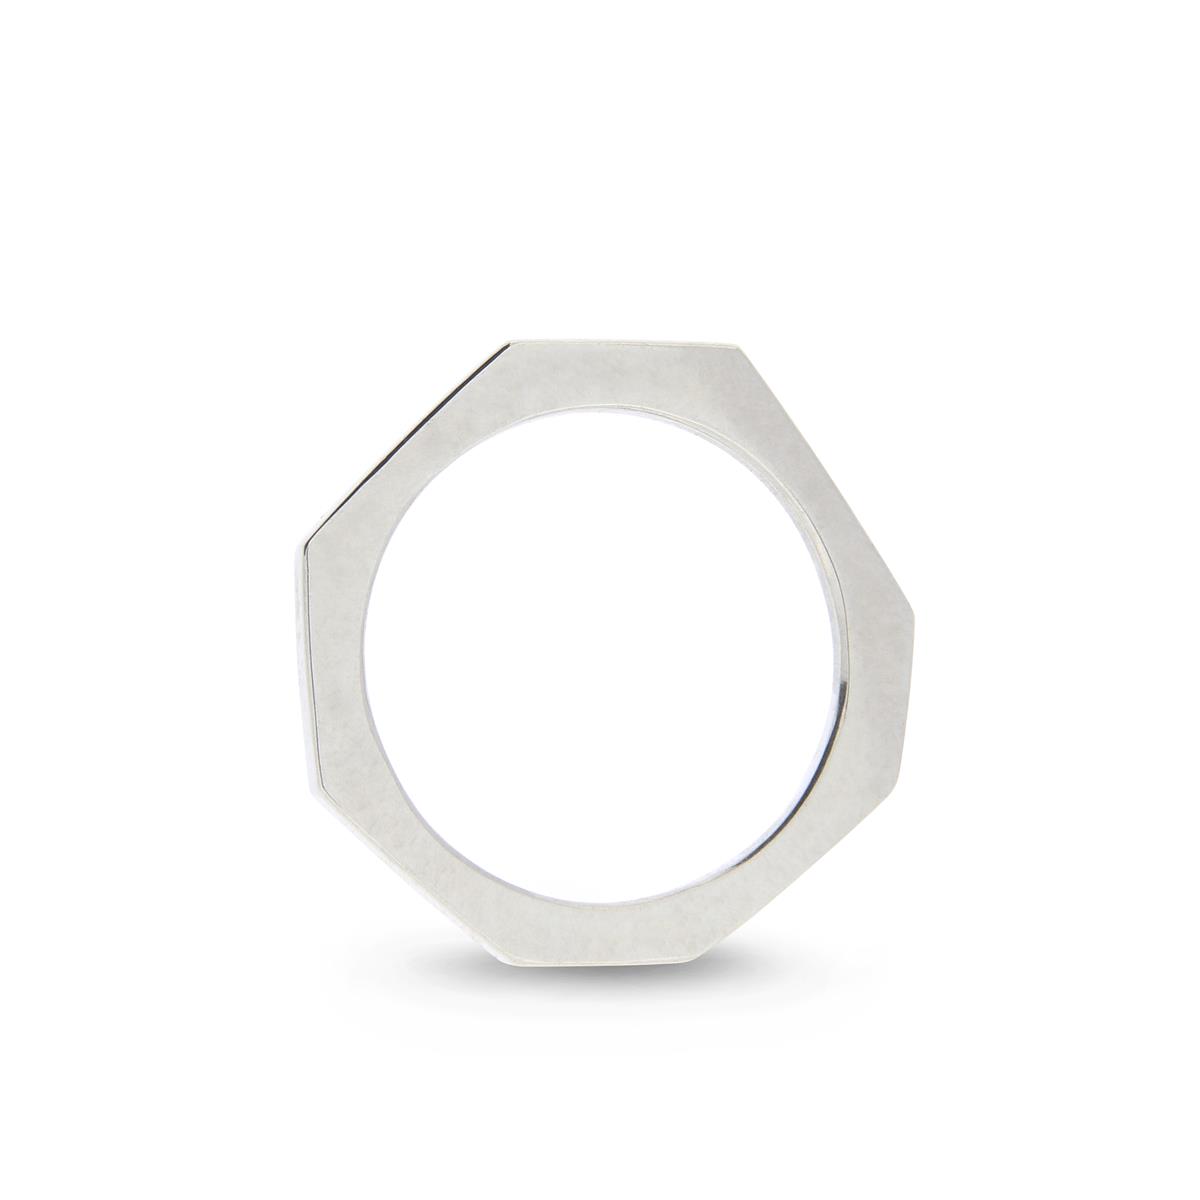 Katie g. Jewellery - Cutting Edge Ring - XS - Sterling silber poliert - 120€